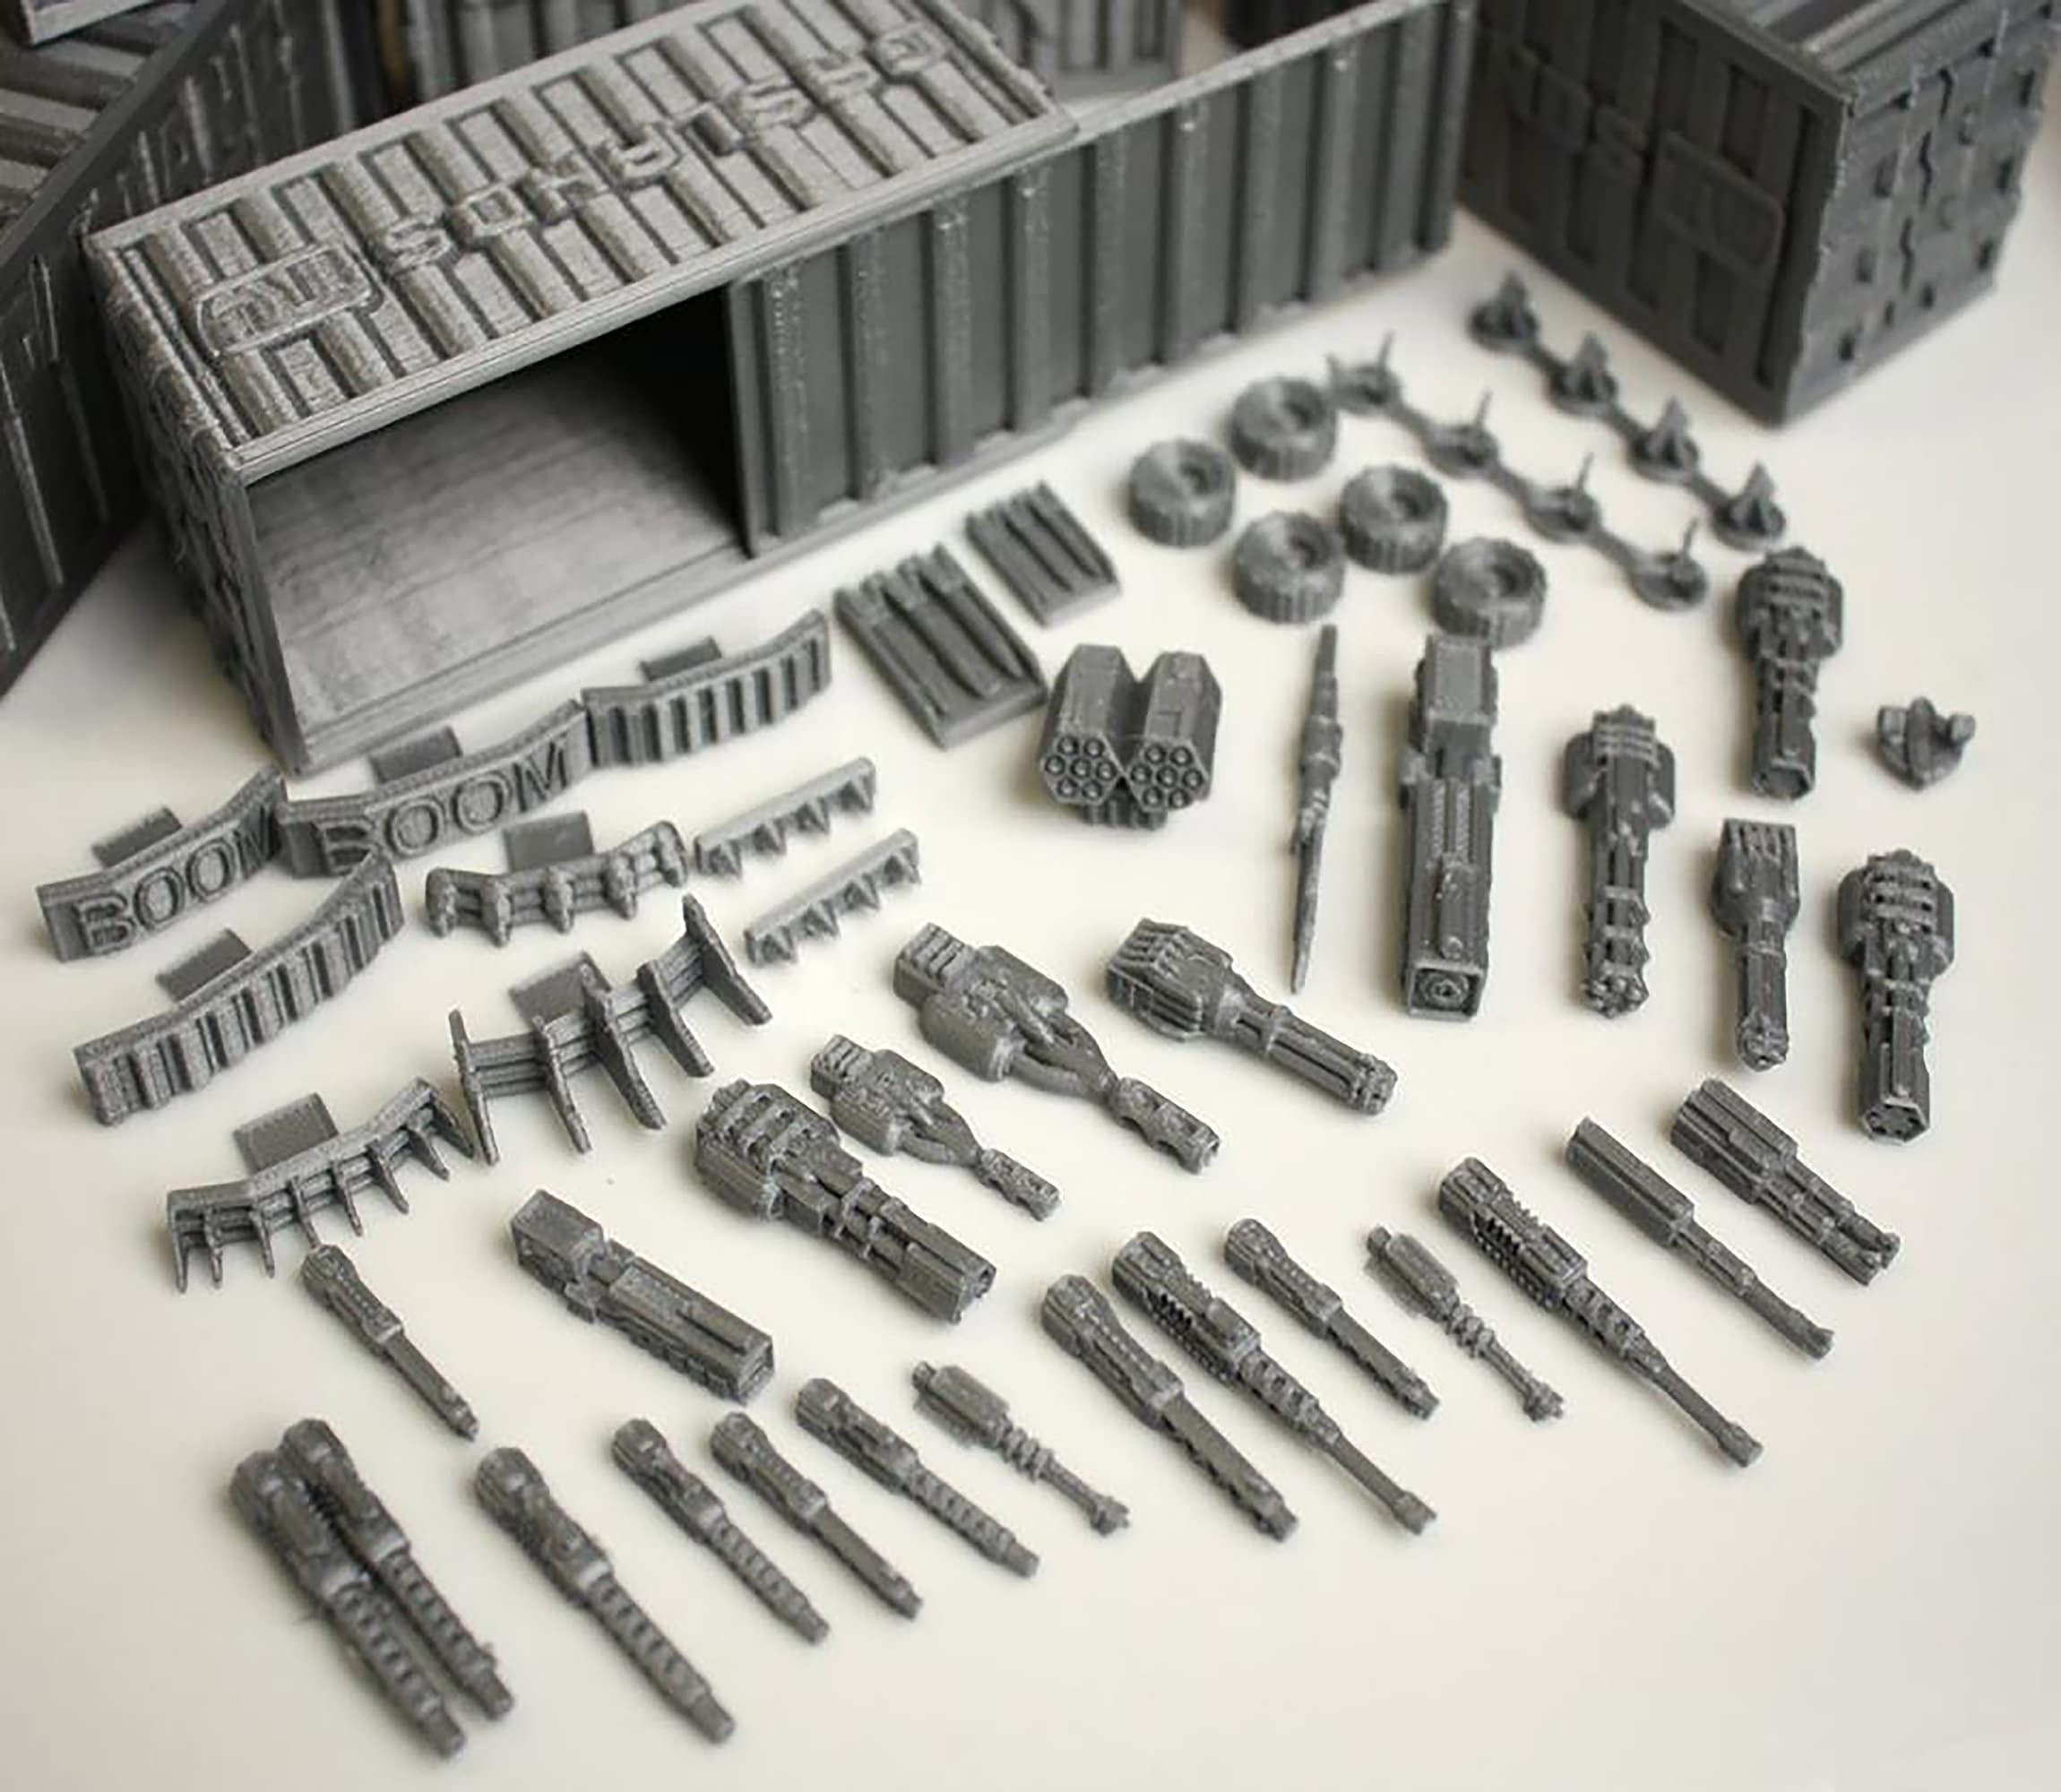 Gaslands Conversion Bits – Where To Buy? – From The Wastes